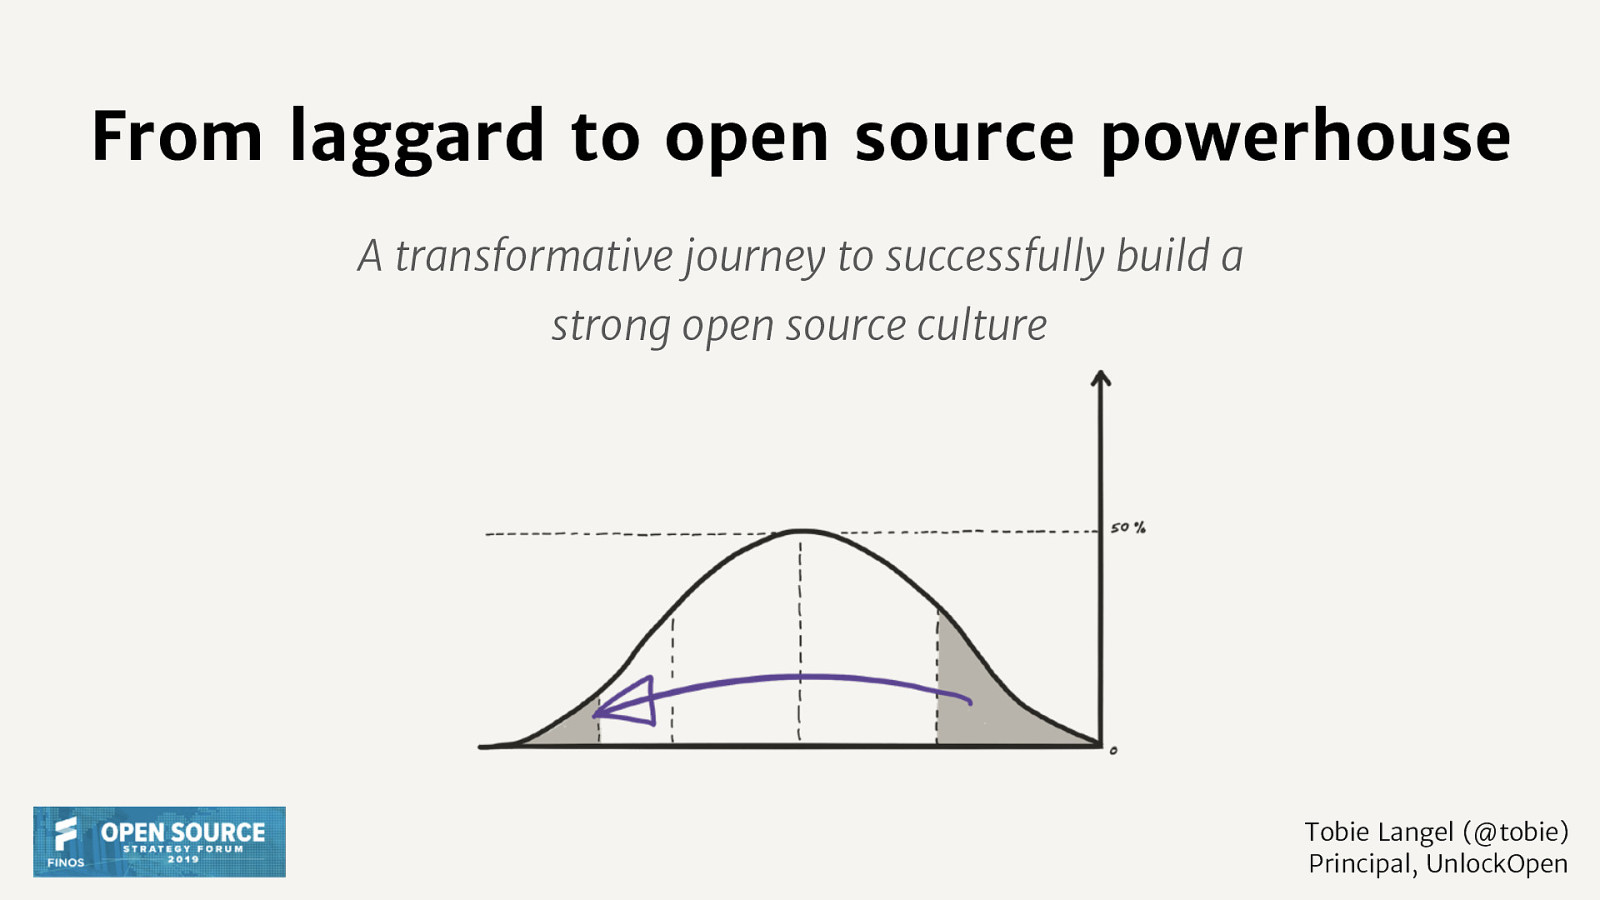 From laggard to open source power house—a transformative journey to successfully build a strong open source culture